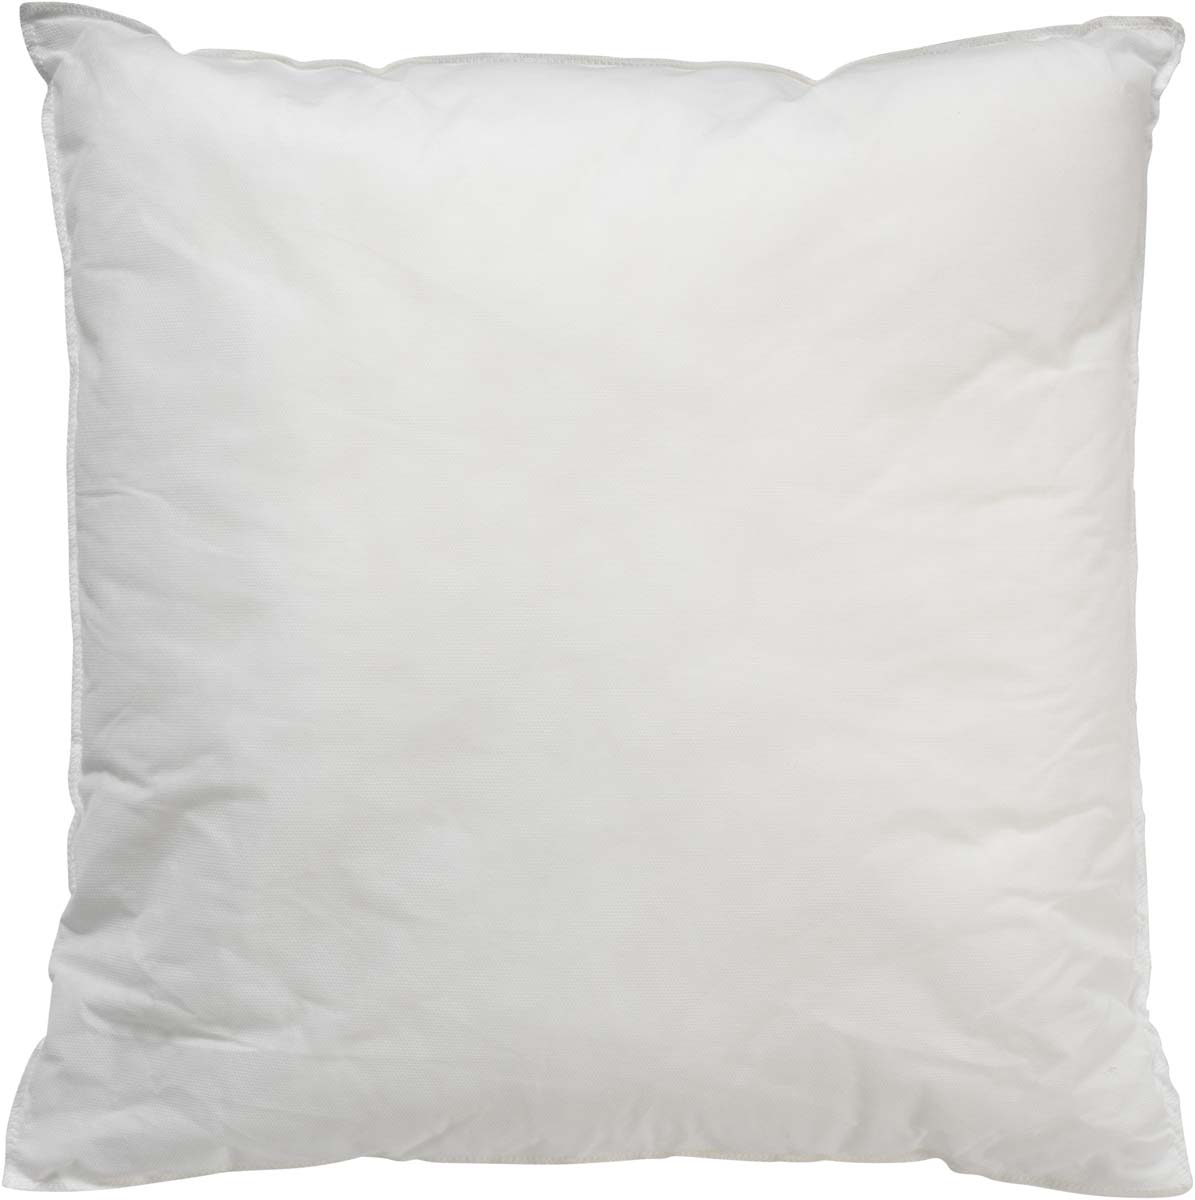 Inner cushion 50x50 cm With polyester filling 450 gr